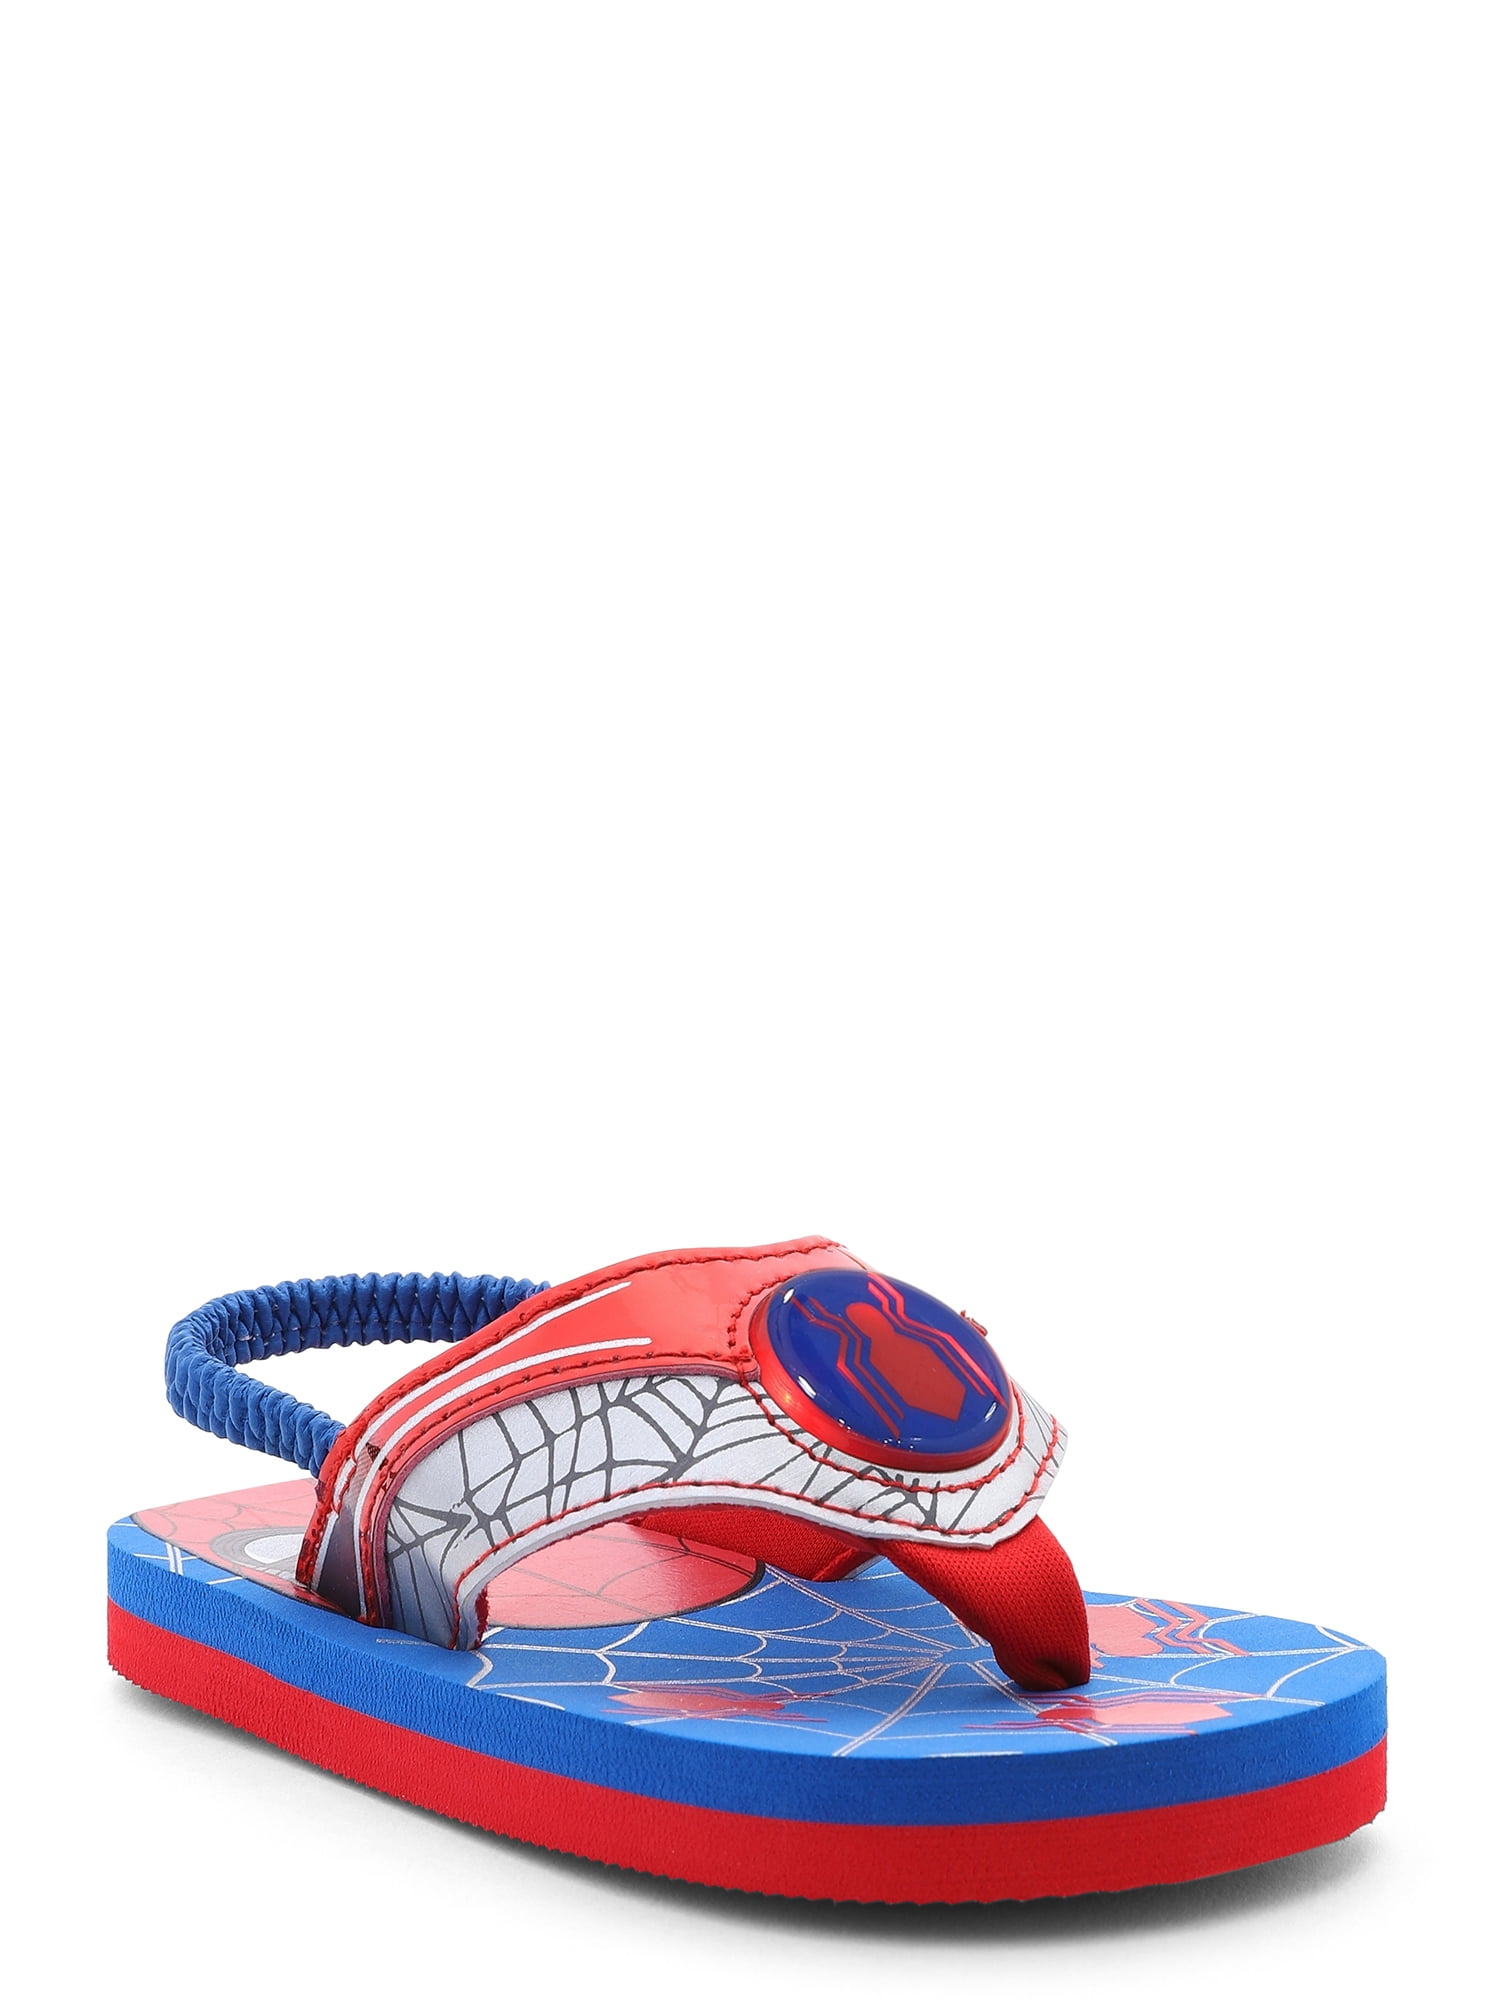 Boys Flip Flop style Sandals with Spiderman detail and elasticated back 